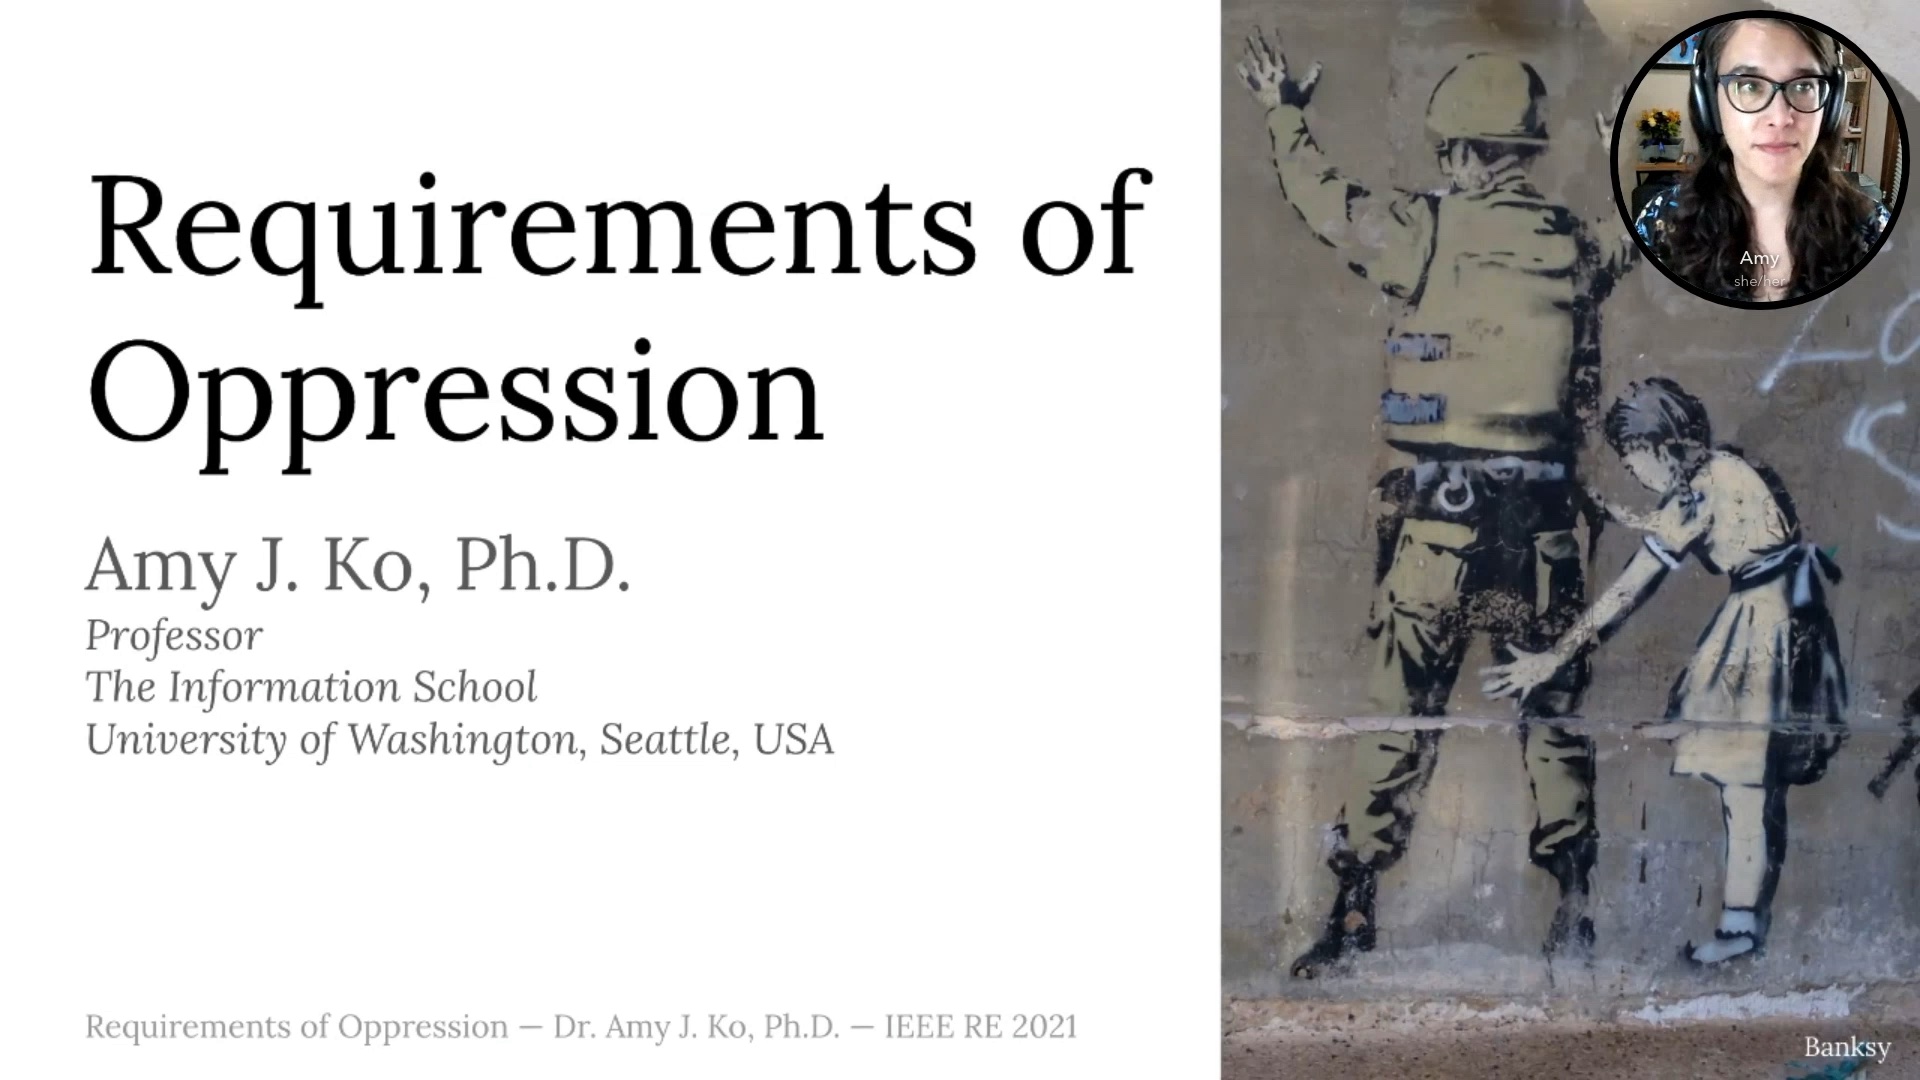 The title slide, which says 'Requirements of Oppression' and shows a Banksy piece with a small girl strip searching a soldier.